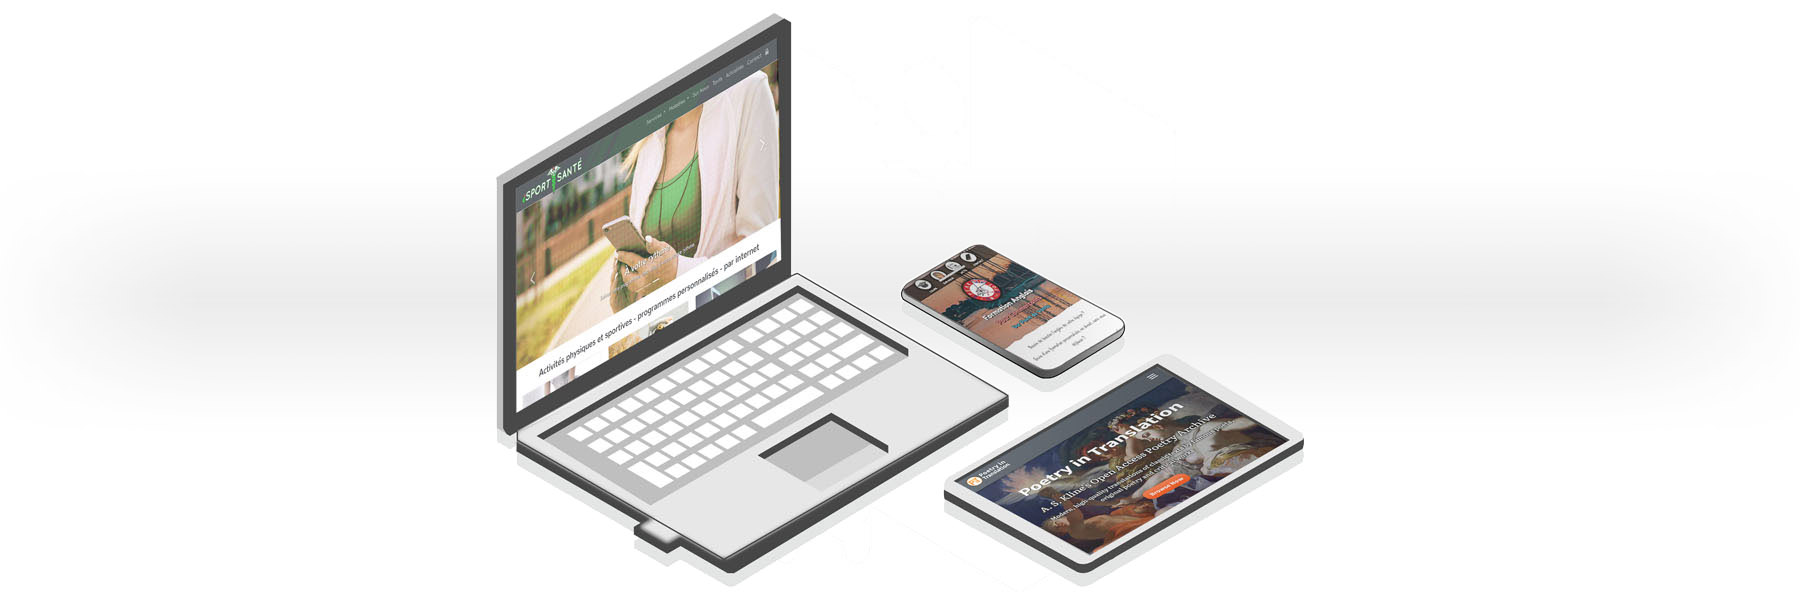 Responsive websites for all screen sizes